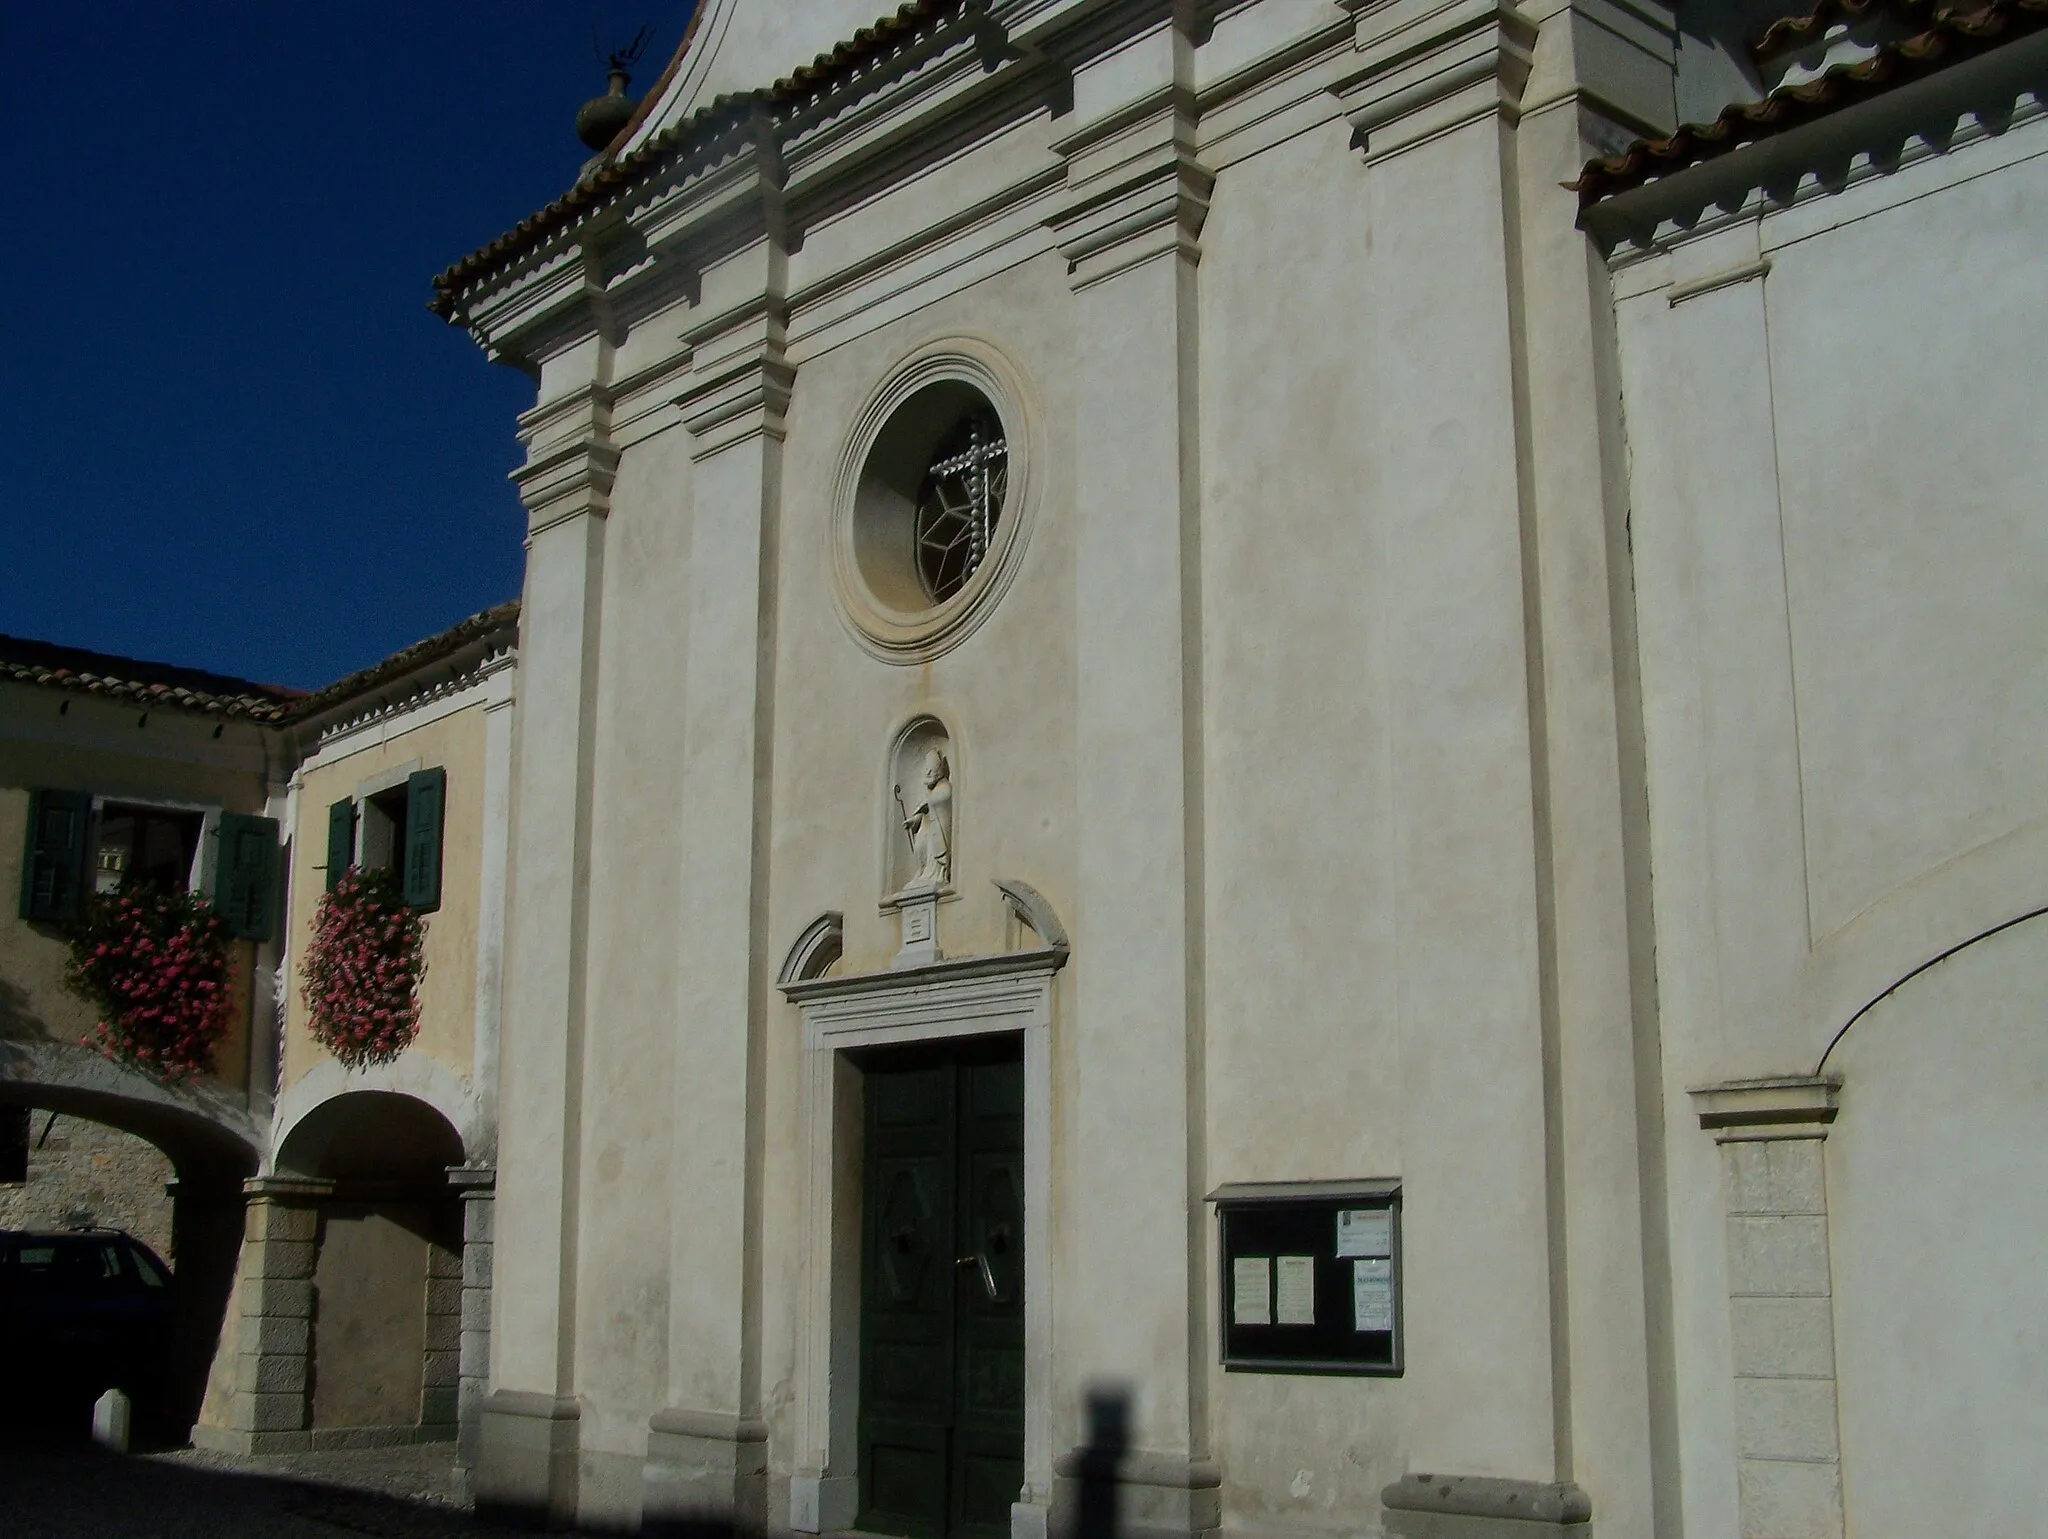 Photo showing: The church of San Nicola, in Strassoldo, Friuli, Nort-East Italy